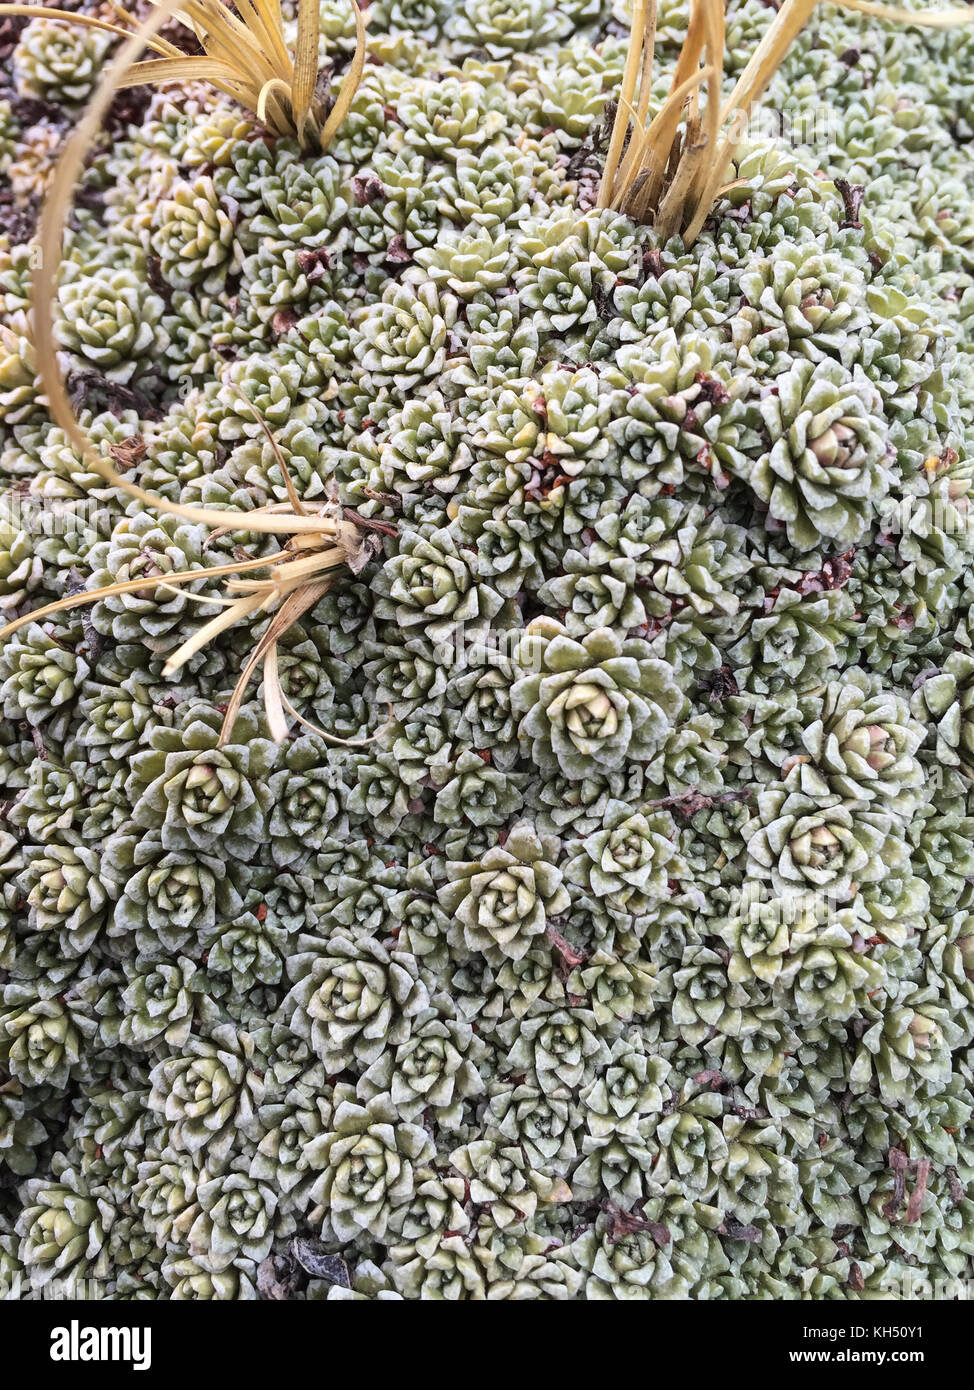 Tiny, closely packed alpine plant community on a rocky Himalayan slope above Thorung Phedi, Manag Nepal Stock Photo